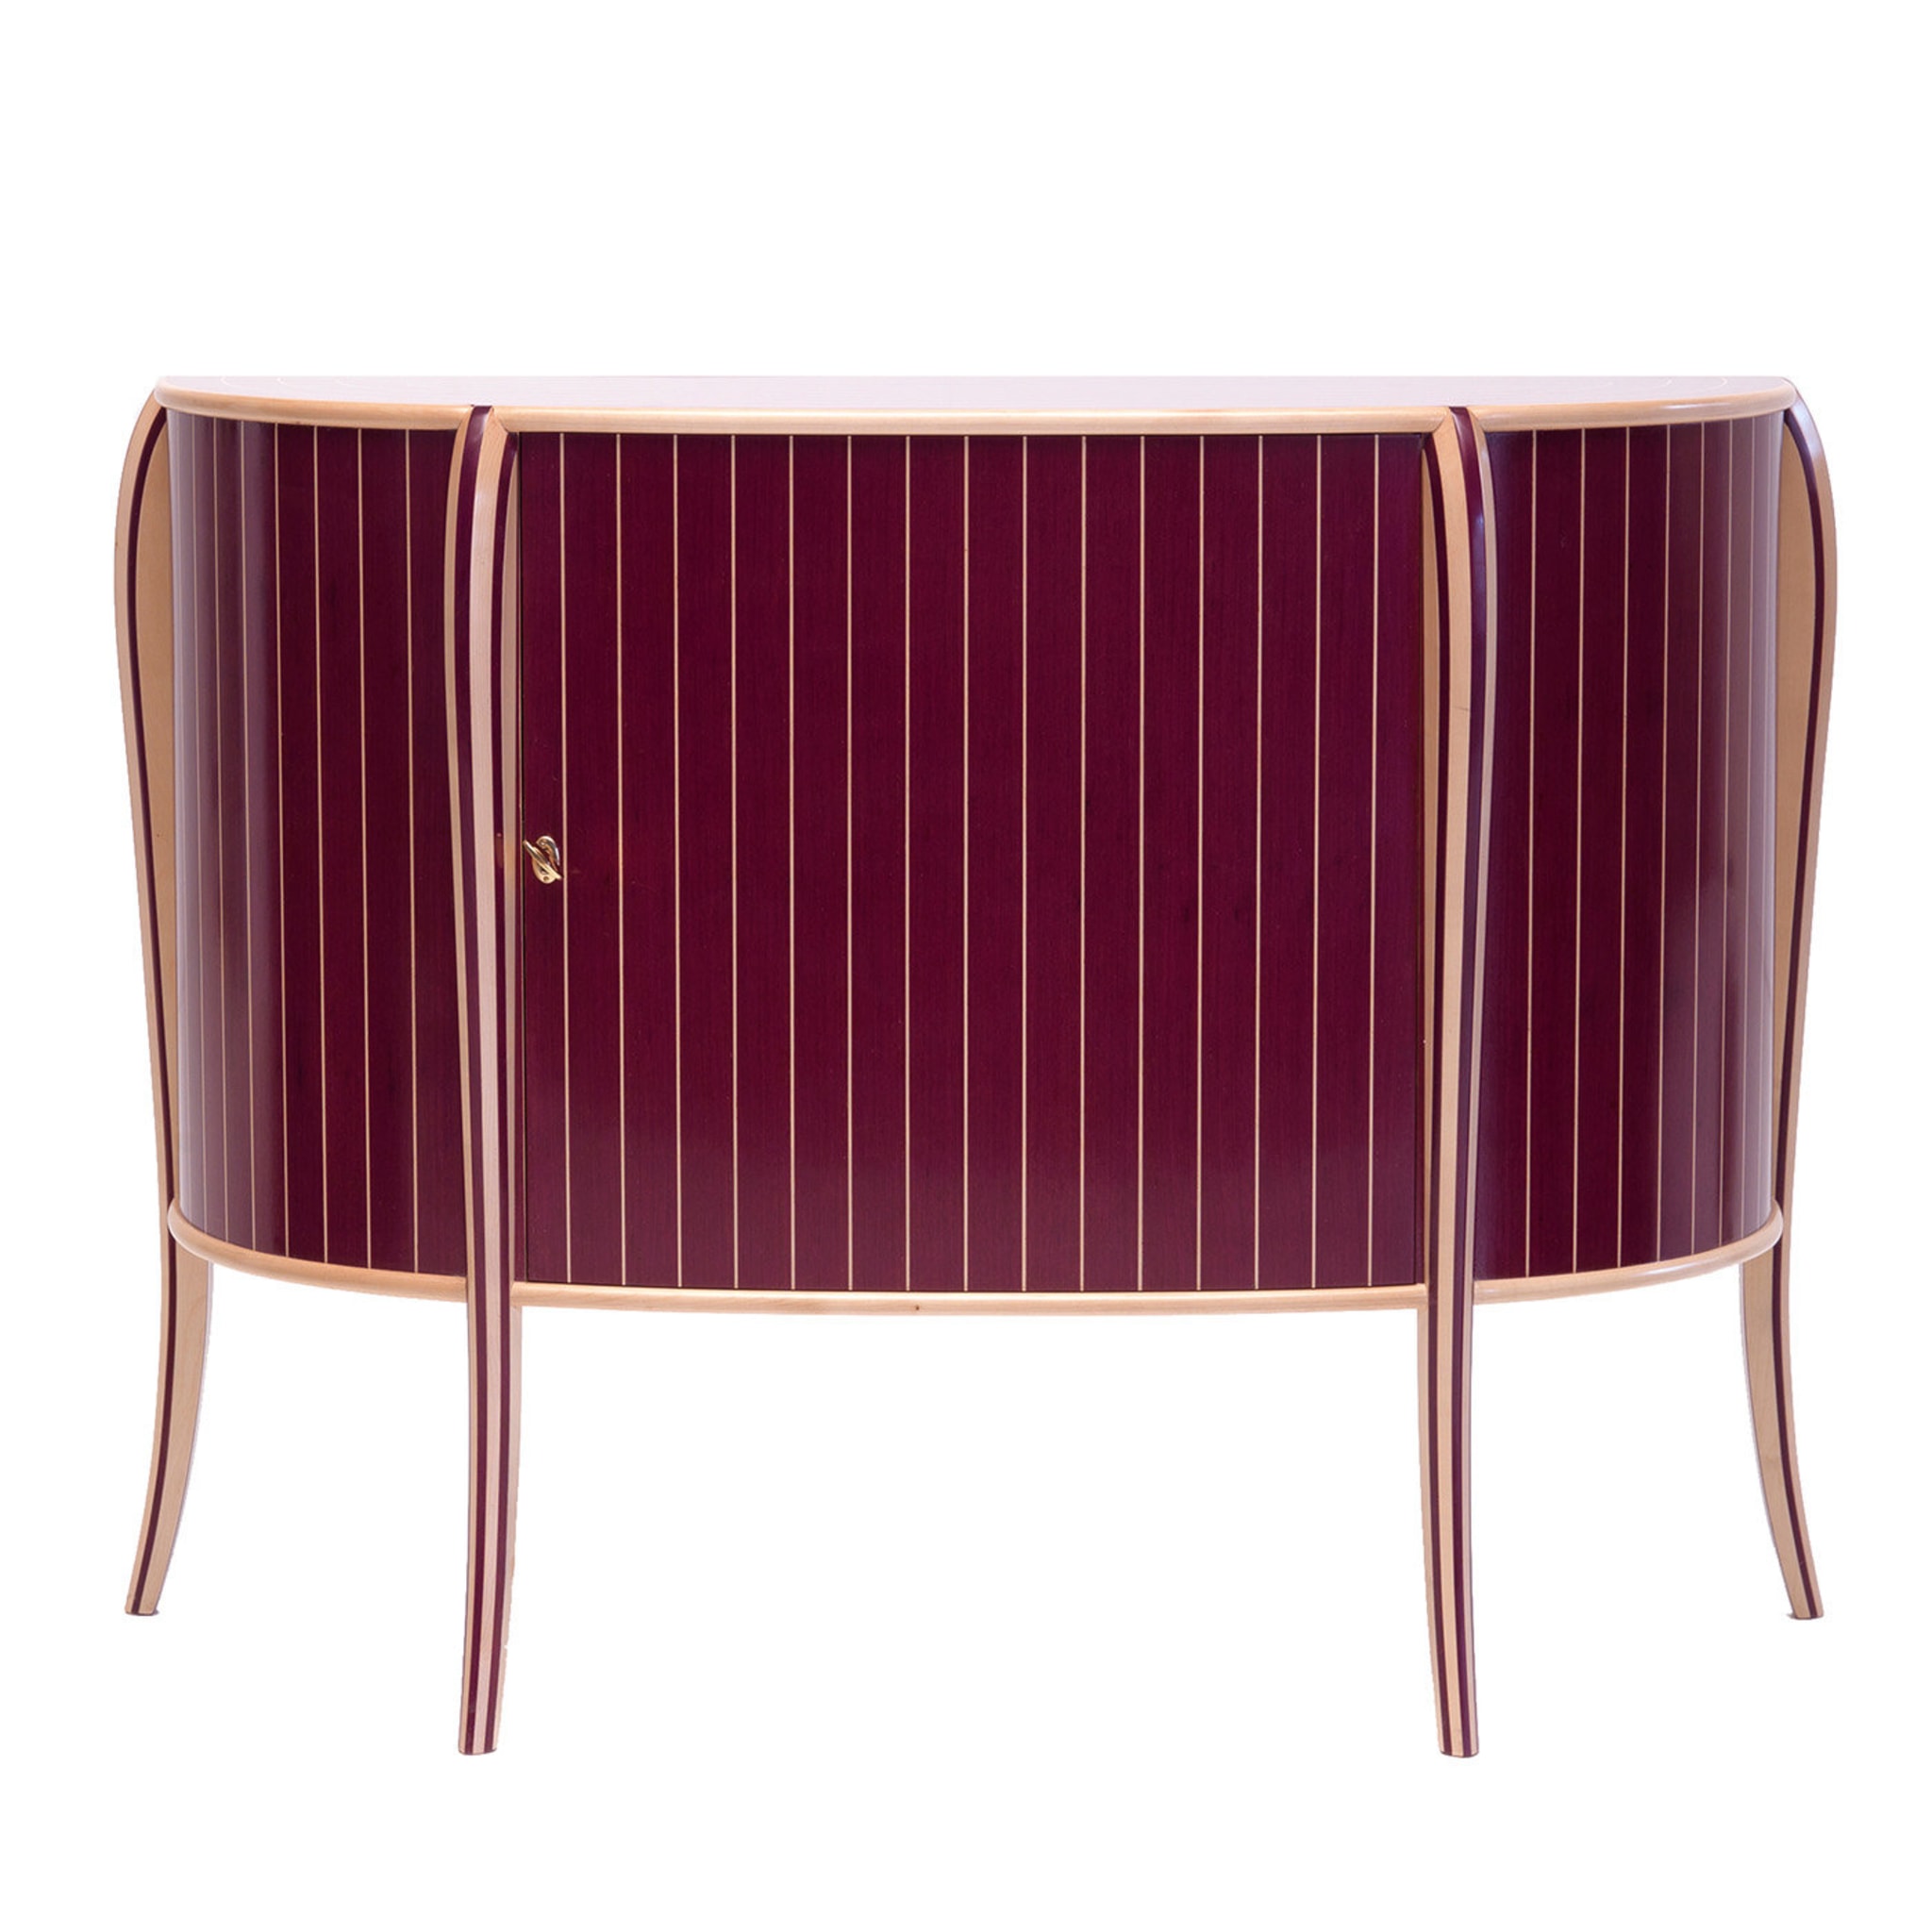 Maple and Purpleheart Marquetry Sideboard - Main view